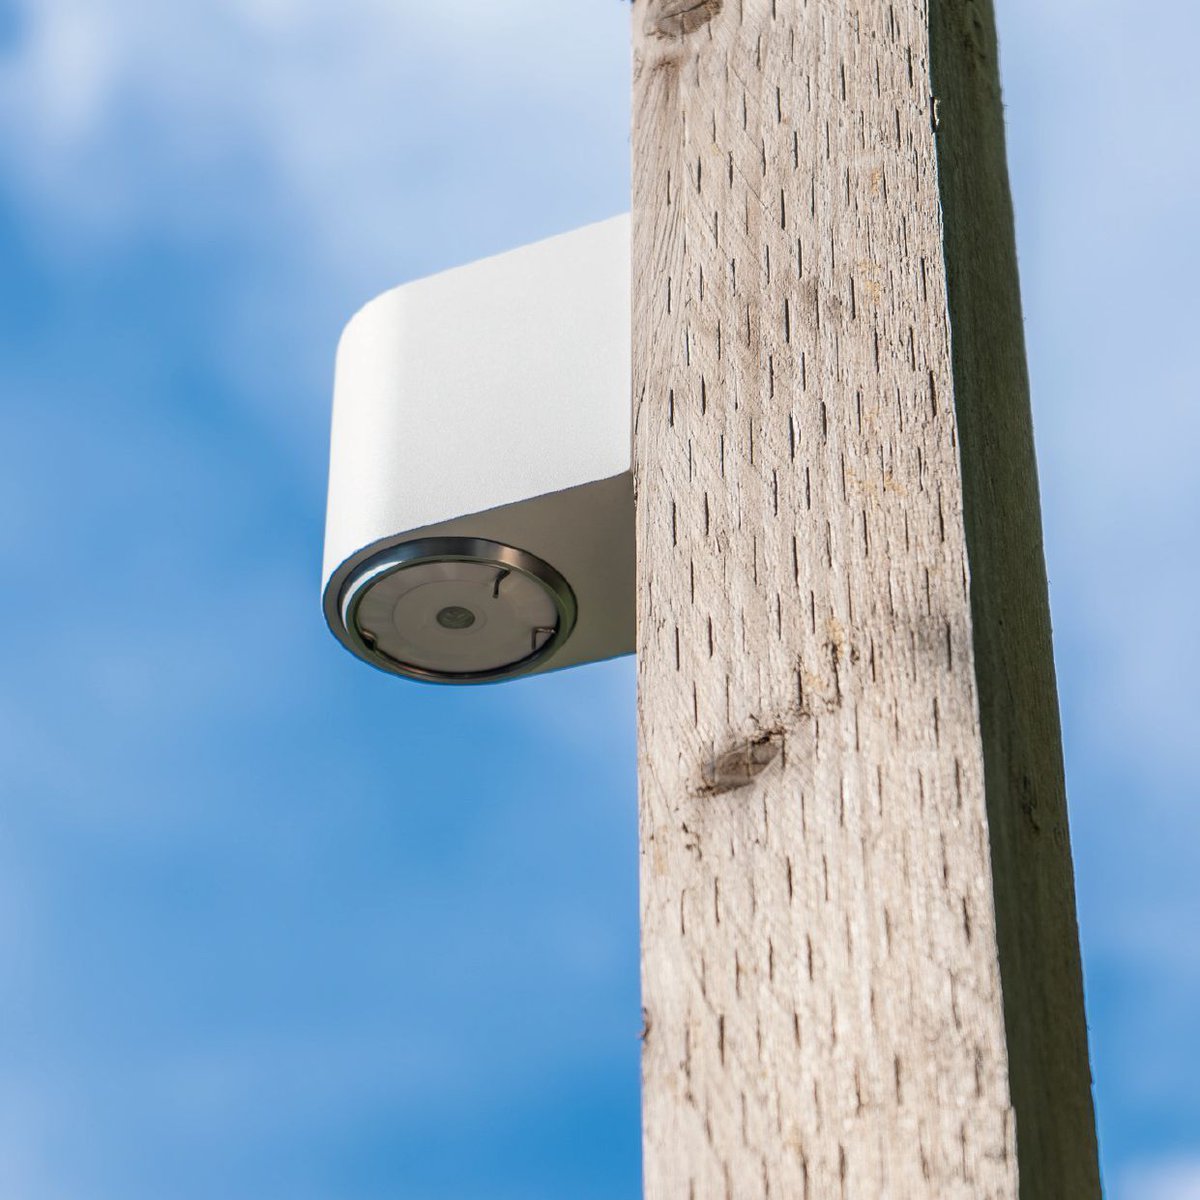 The robust aluminium Sensor Wall Mount Accessory is the perfect solution for outdoor motion sensors. #KNX #control4 #lutron #loxone #crestron #avtweeps #tech #ukmfg #smarterhomes #smarthometechnology #smarthome #lighting #integratedtechnology #smarttech #homeautomation #rti